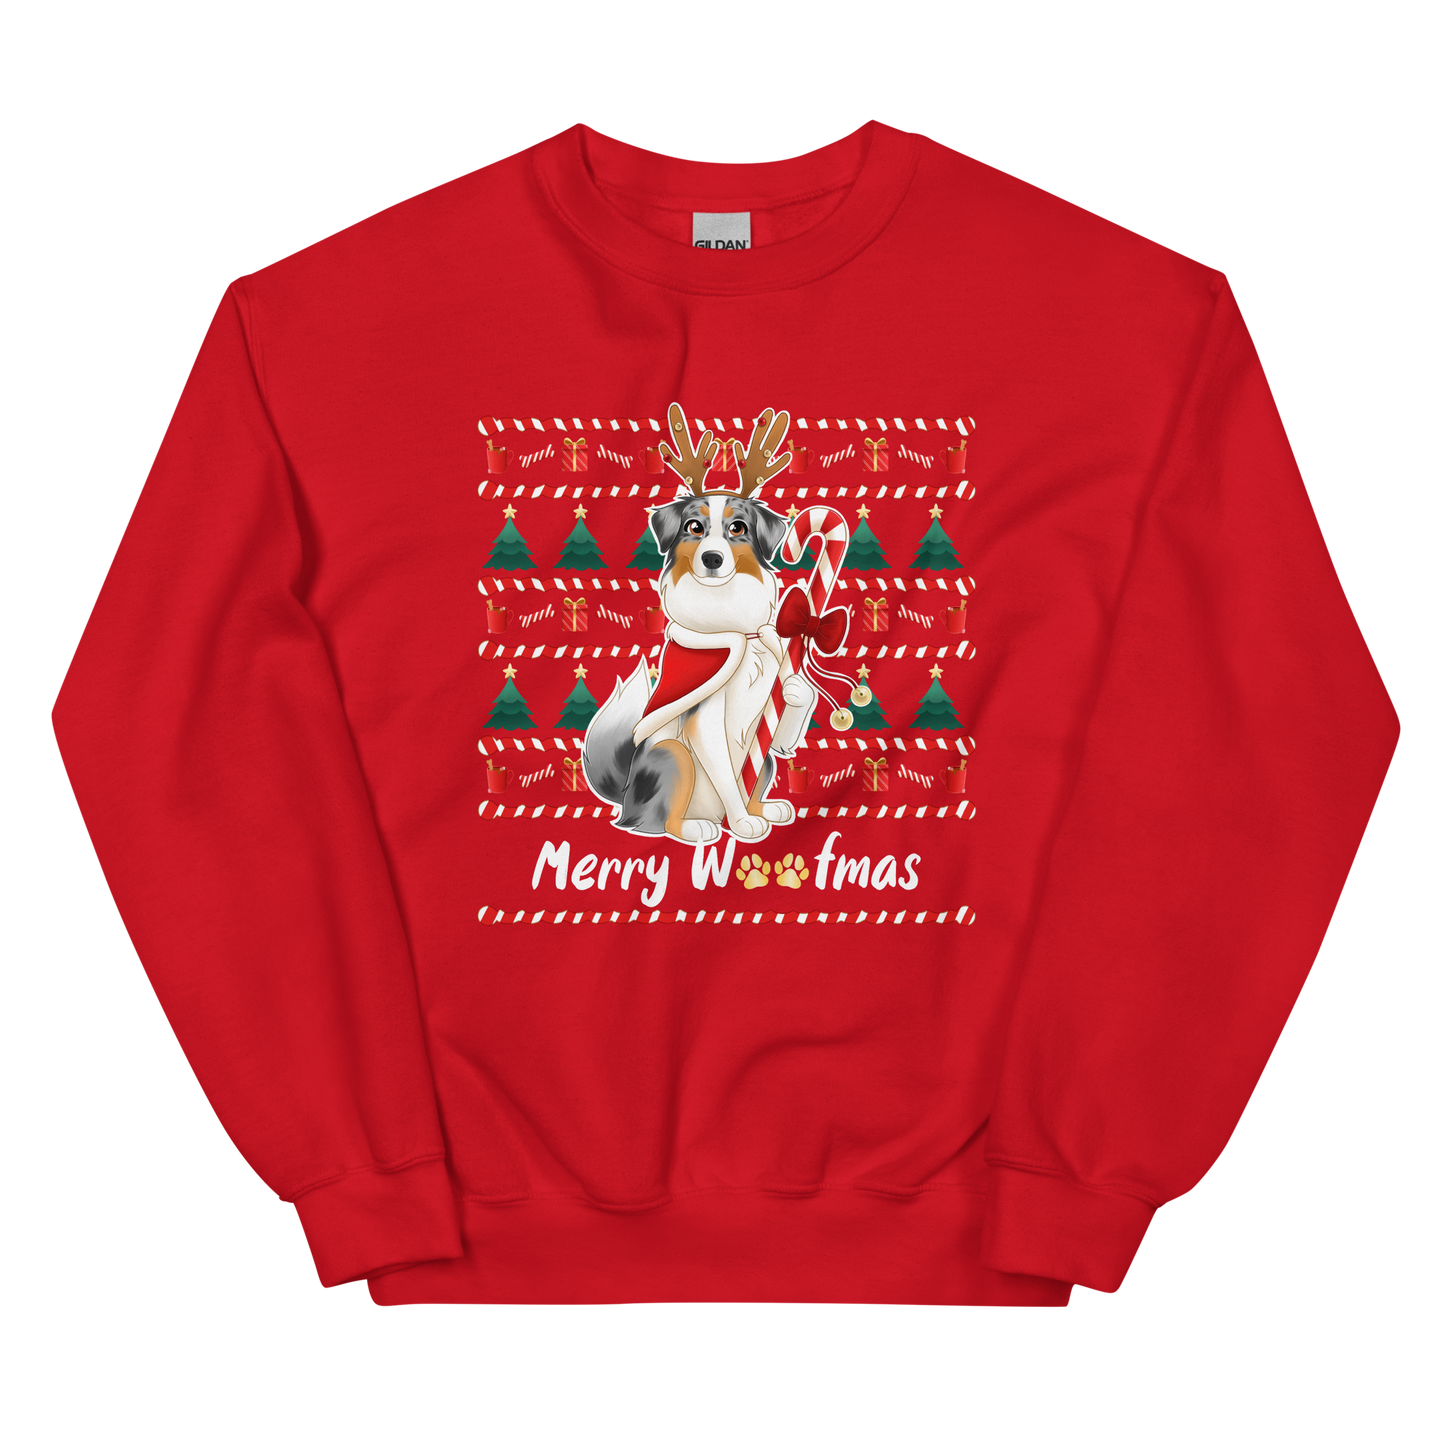 Do you love Christmas as much as you love your Australian Shepherd? Then look no further! You will love this adorable Ugly Christmas Sweater featuring our latest Aussie Mom design. Blue Merle Aussie dressed up for Christmas.